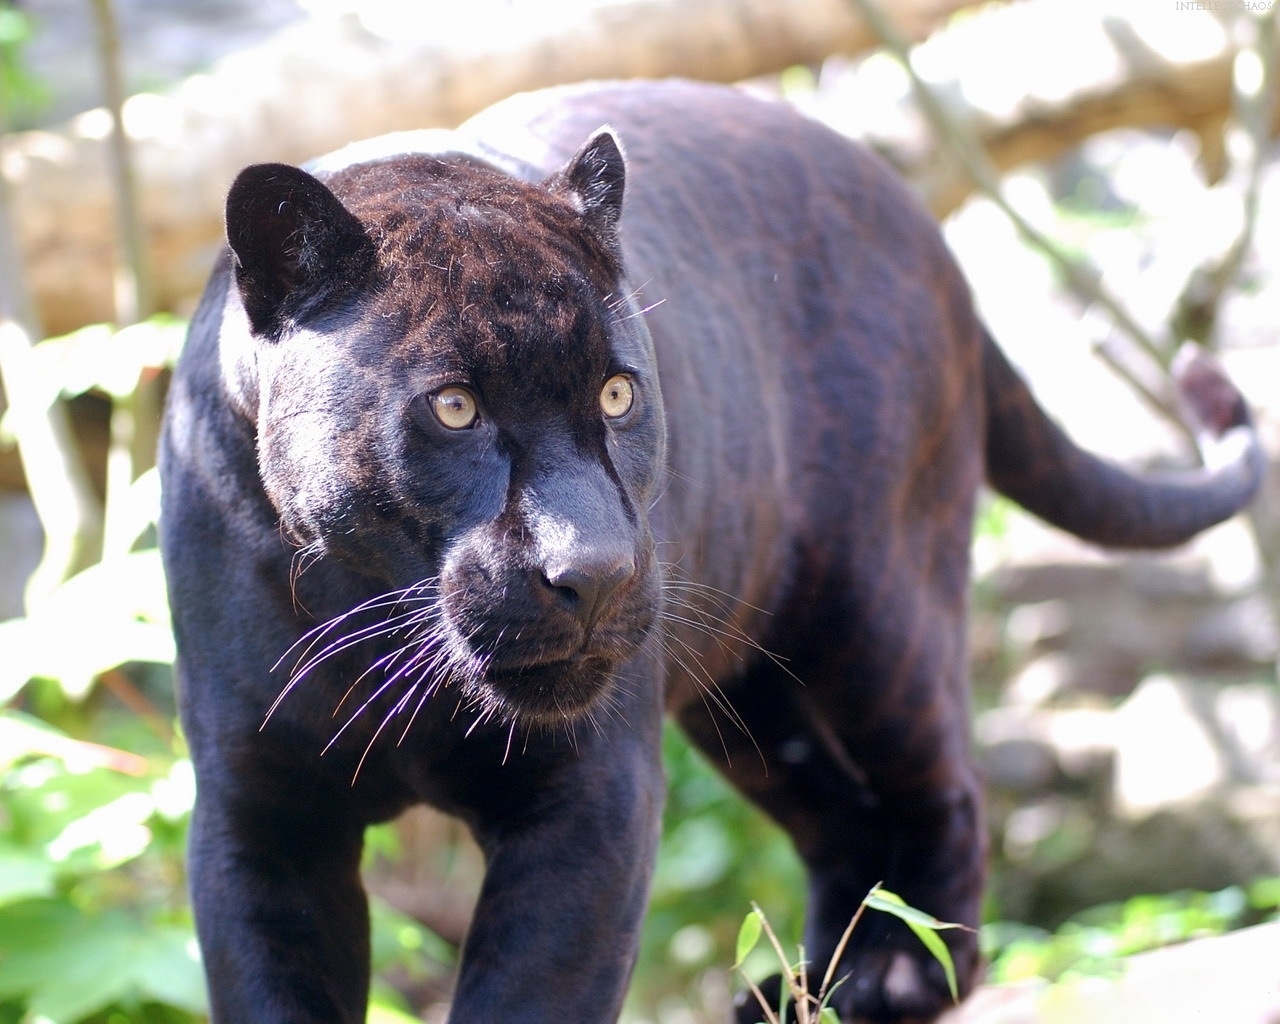 8797 download wallpaper animals, panthers screensavers and pictures for free